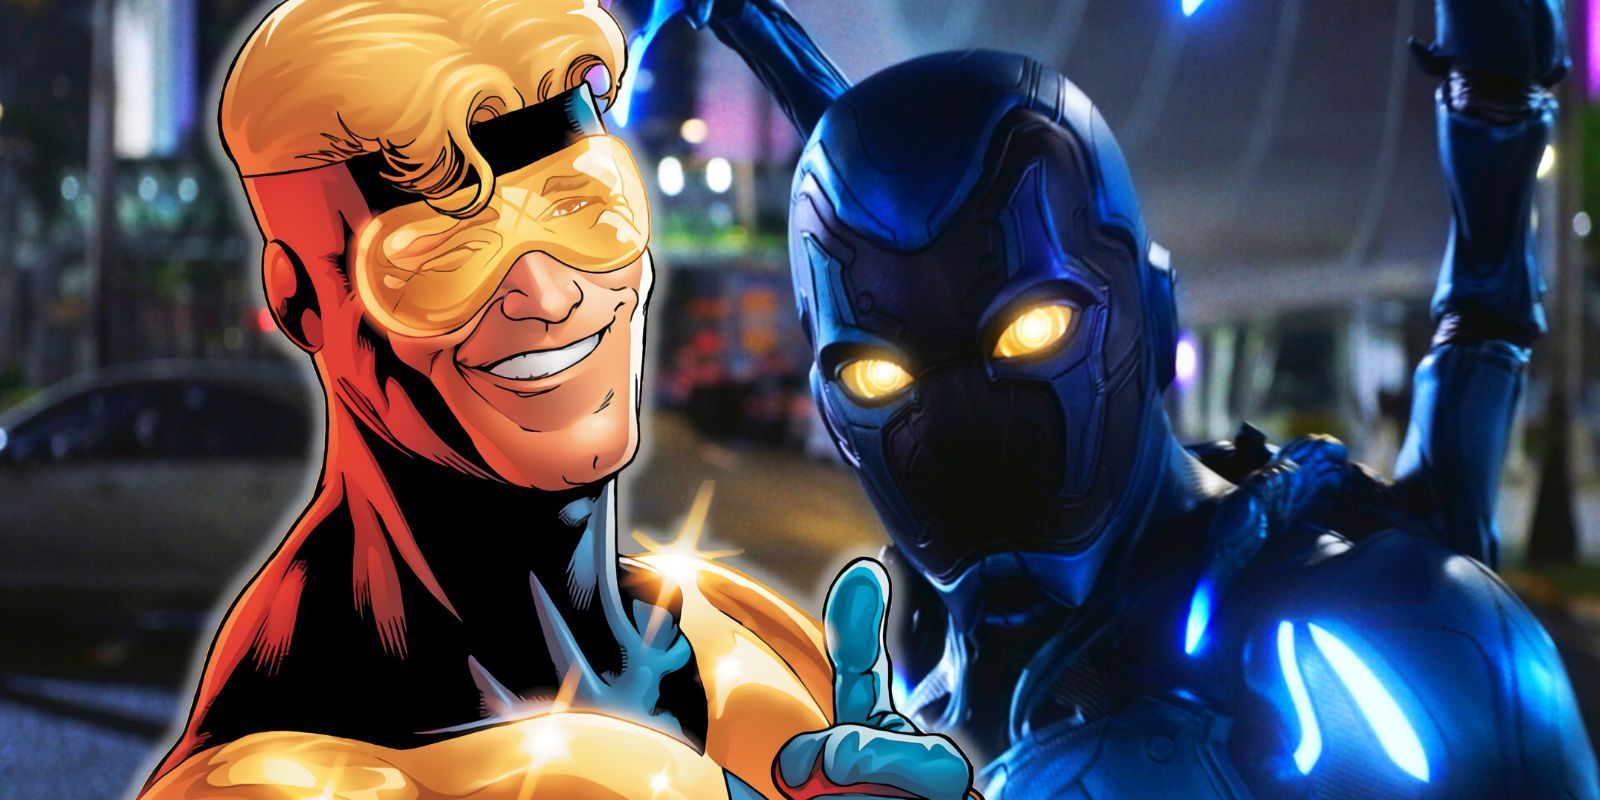 DC's Blue Beetle and GOTG Vol. 3 Battle for Rotten Tomatoes Record